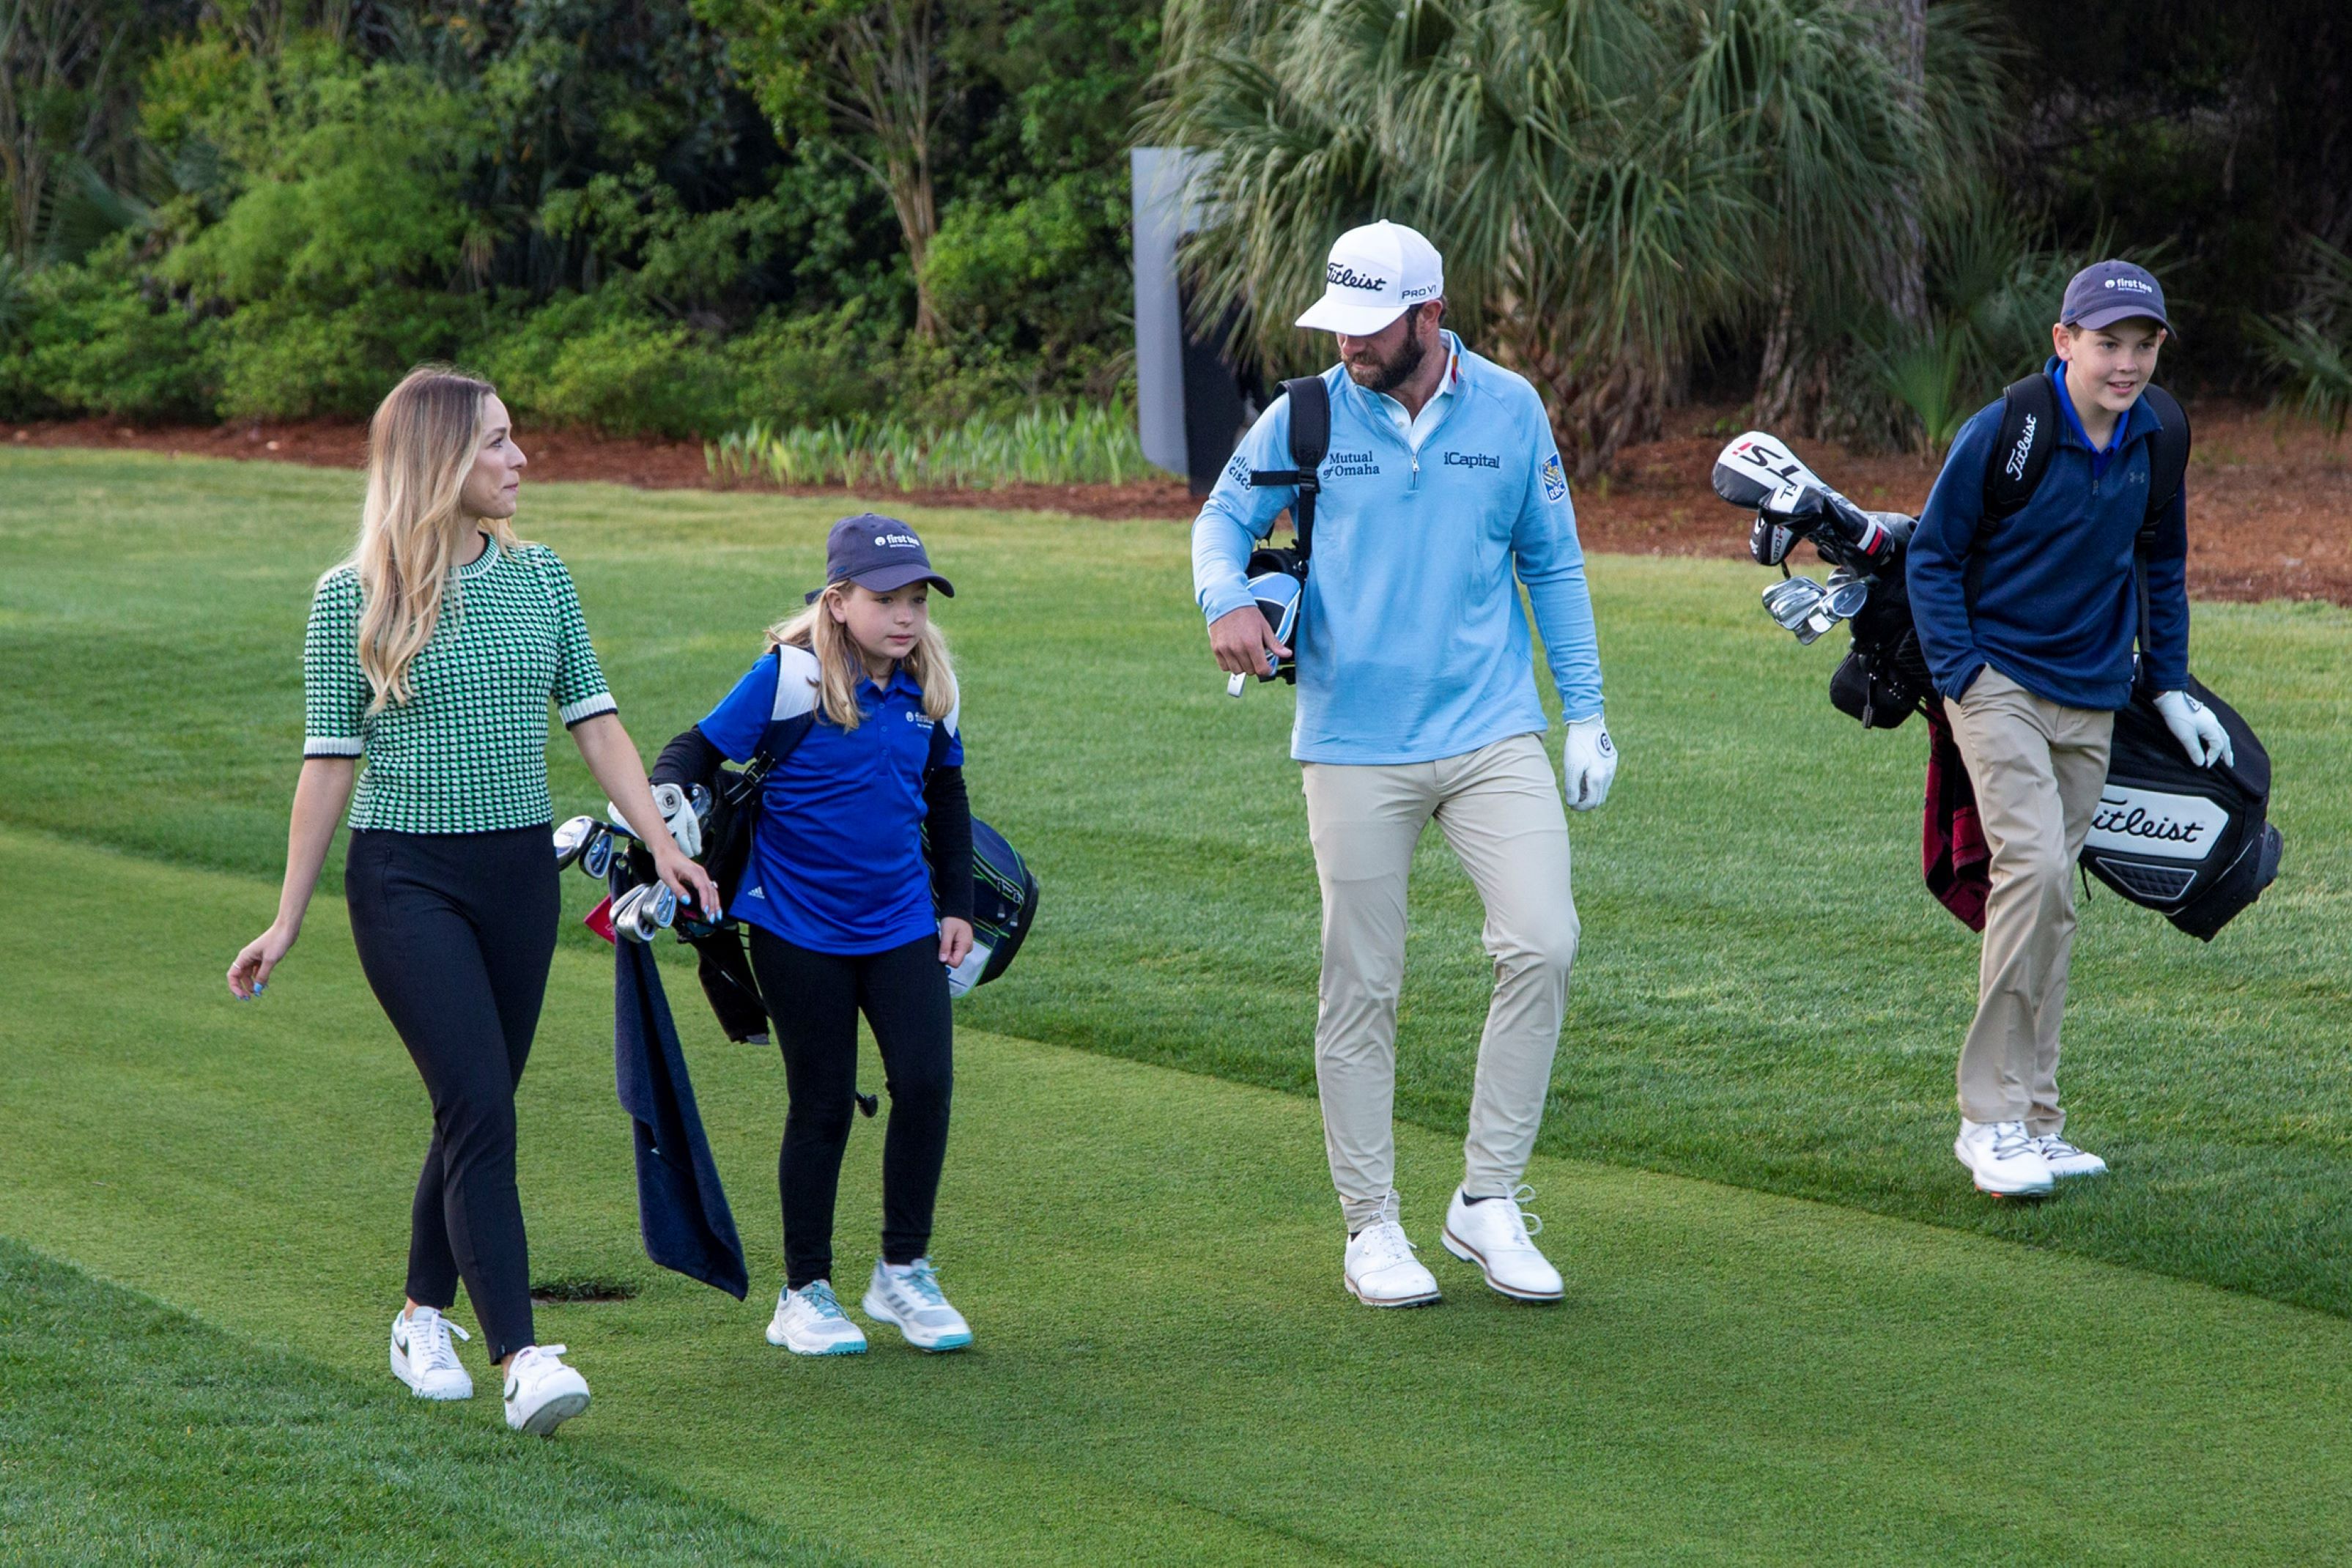 Photo of Team RBC golf ambassador, Cameron Young walking with 11-year-old Paul Morrell and 9-year-old Believe King at the 2023 RBC Heritage.